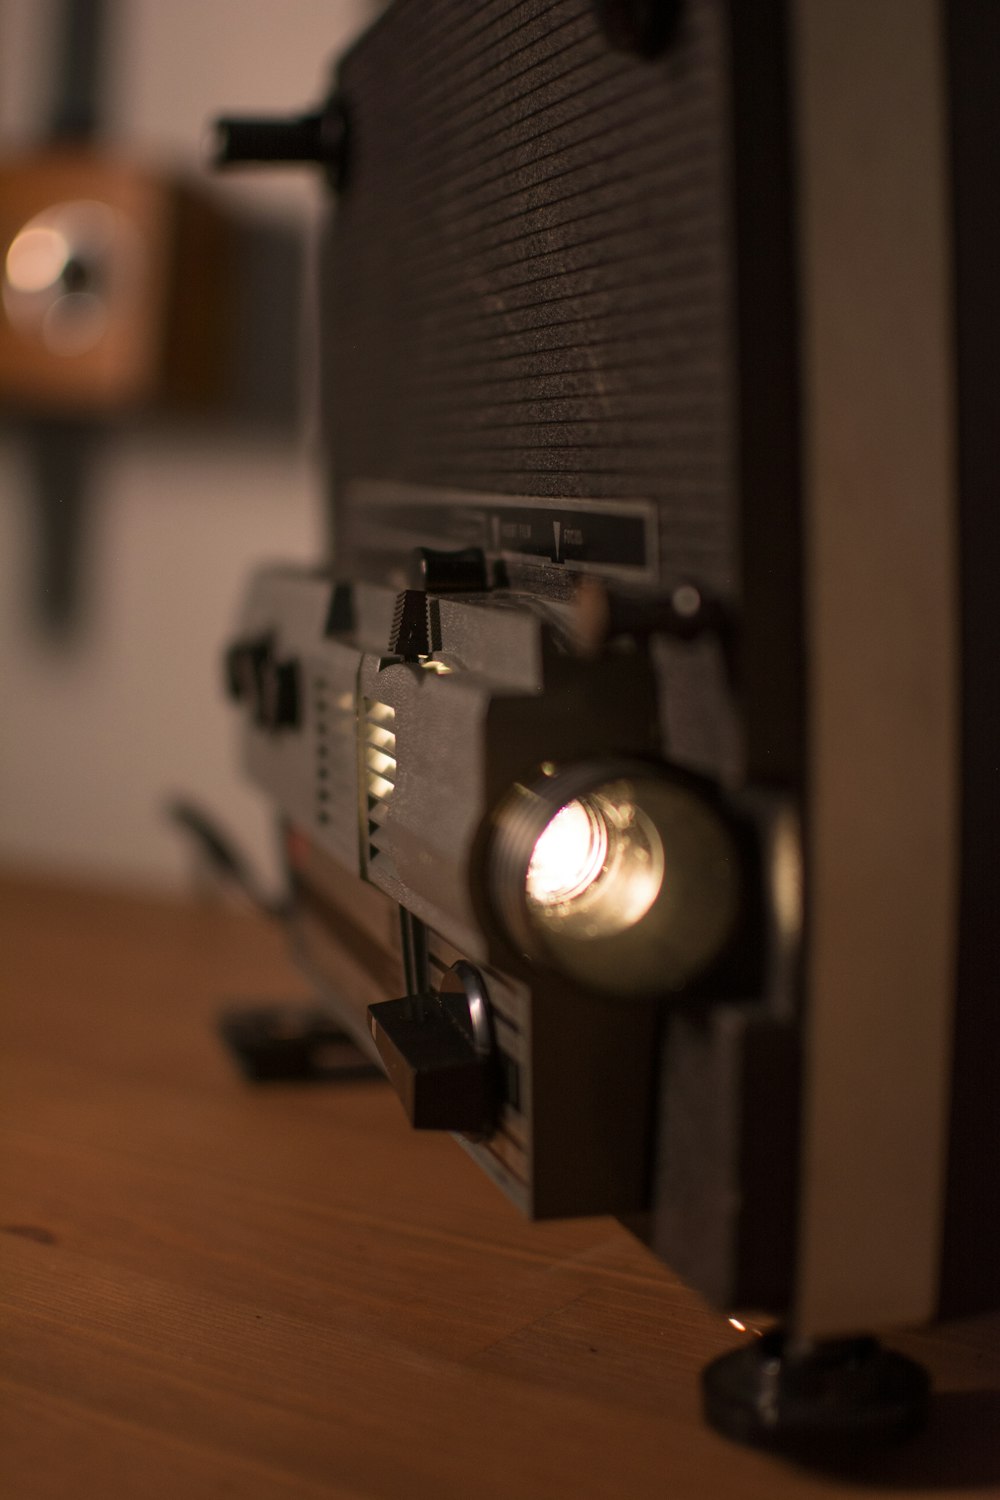 a close up of a radio on a wooden table